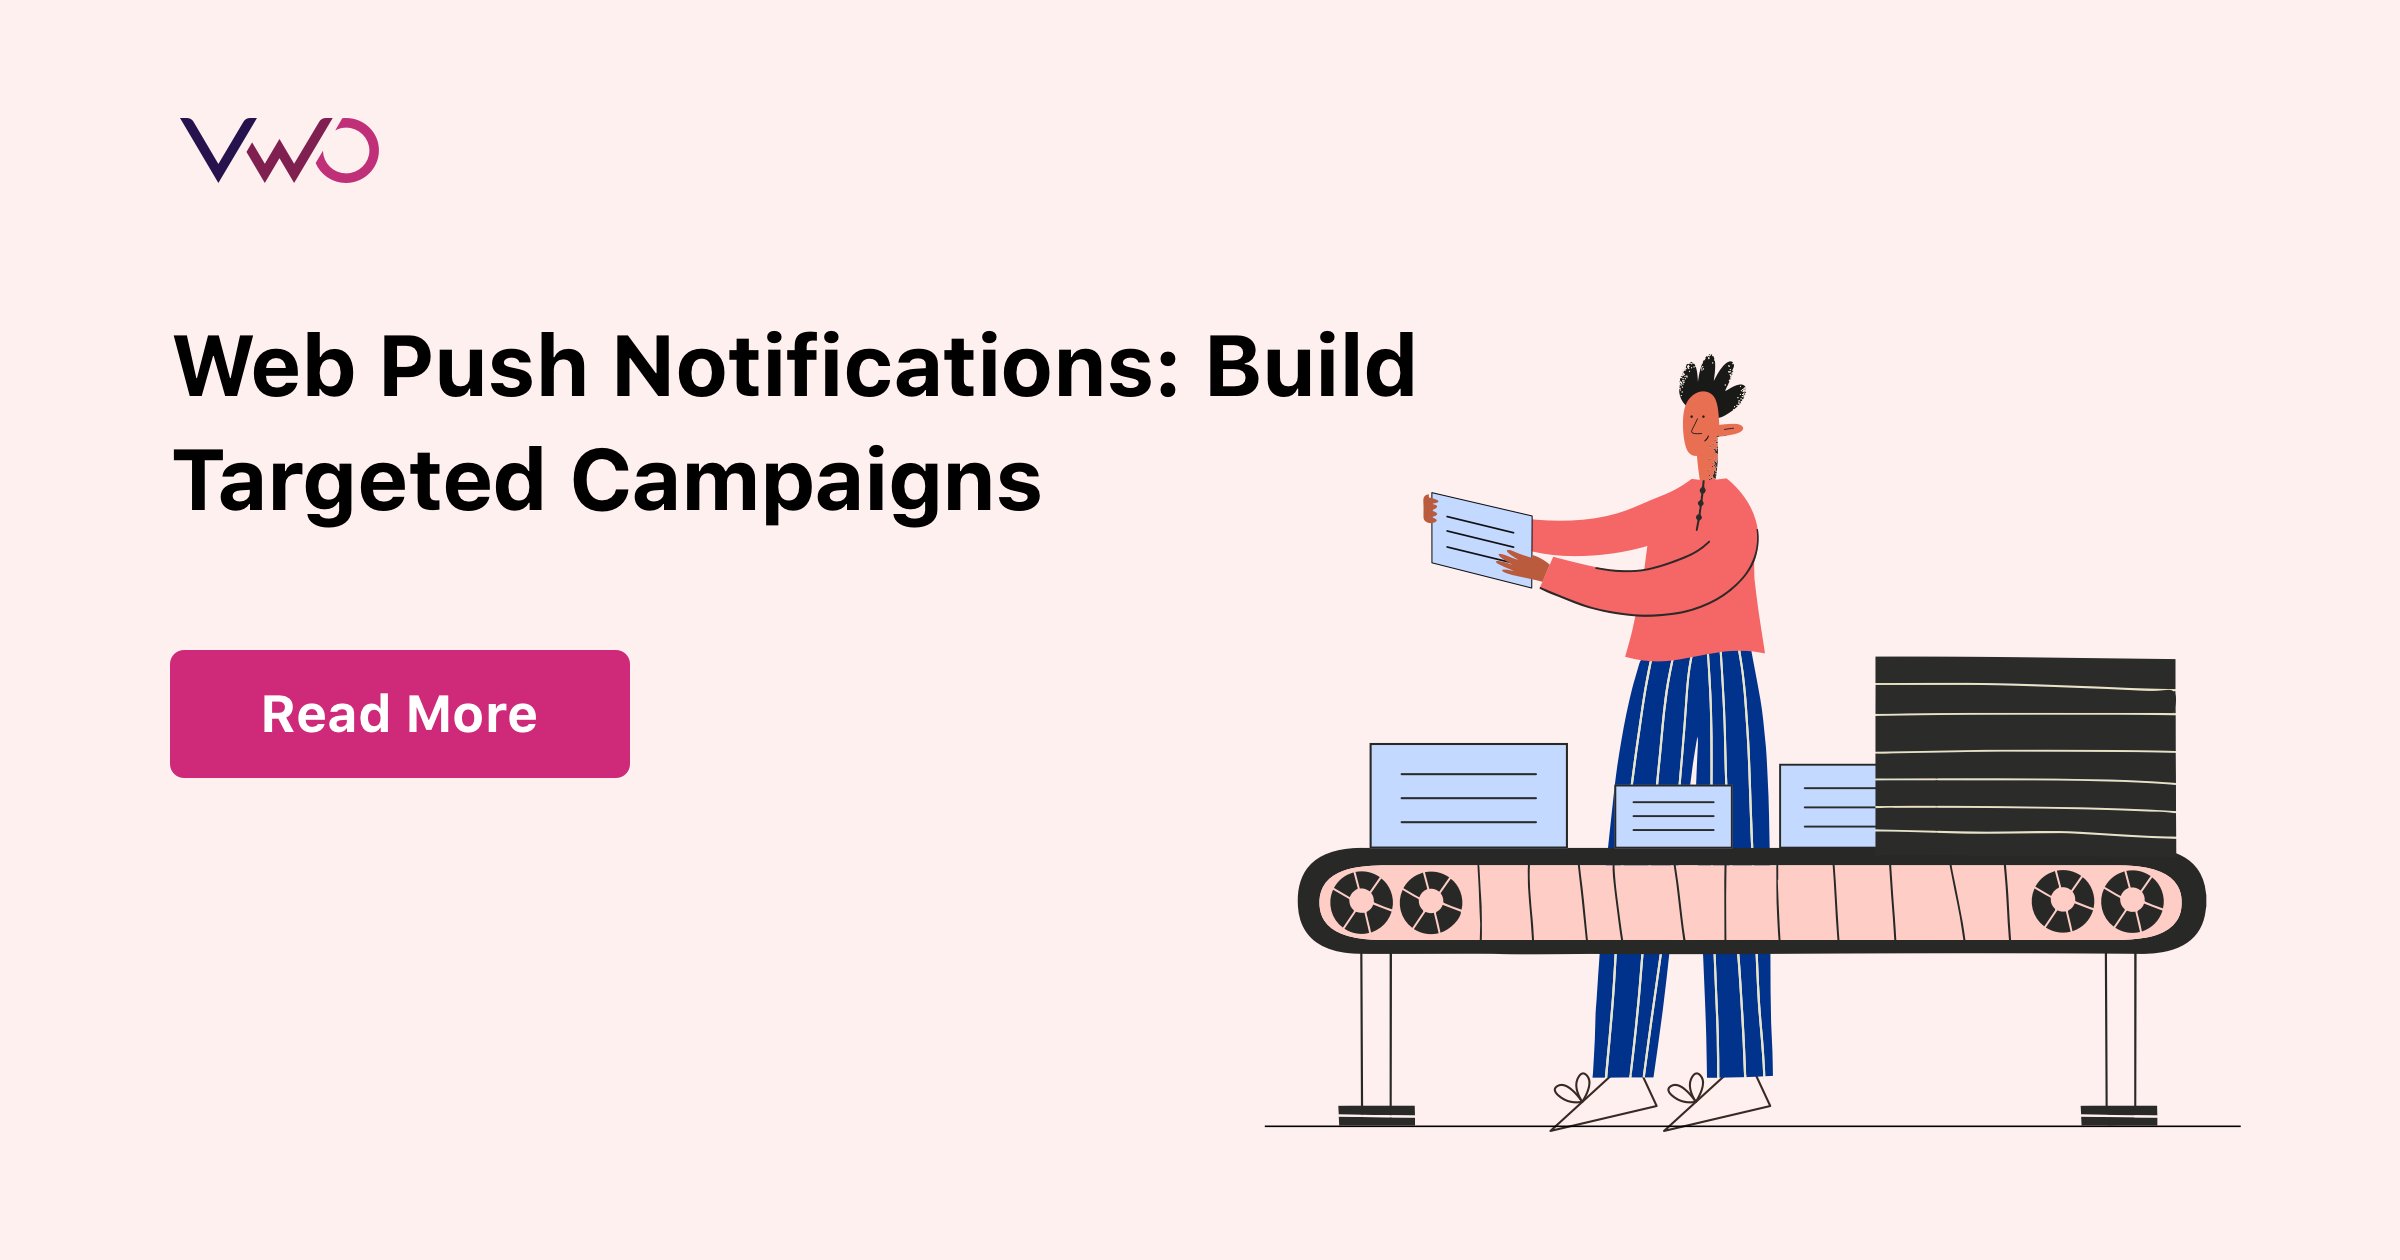 Web Push Notifications: Build Targeted Campaigns